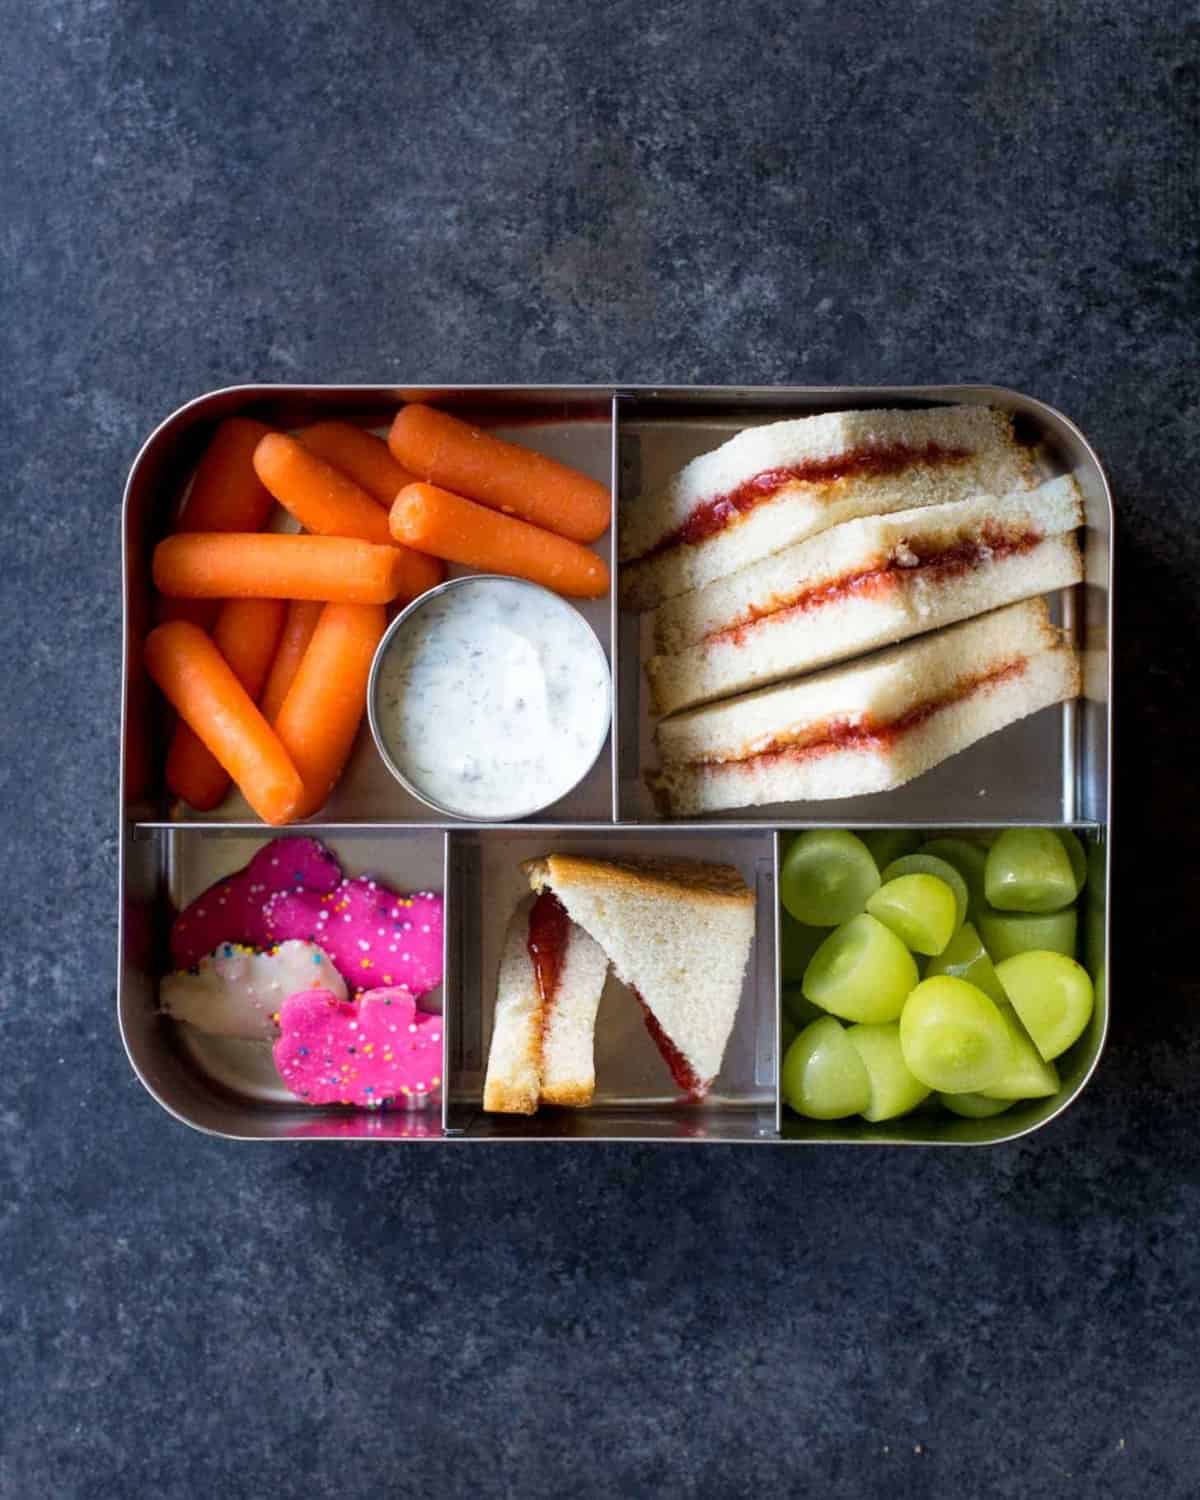 Best Lunch Boxes